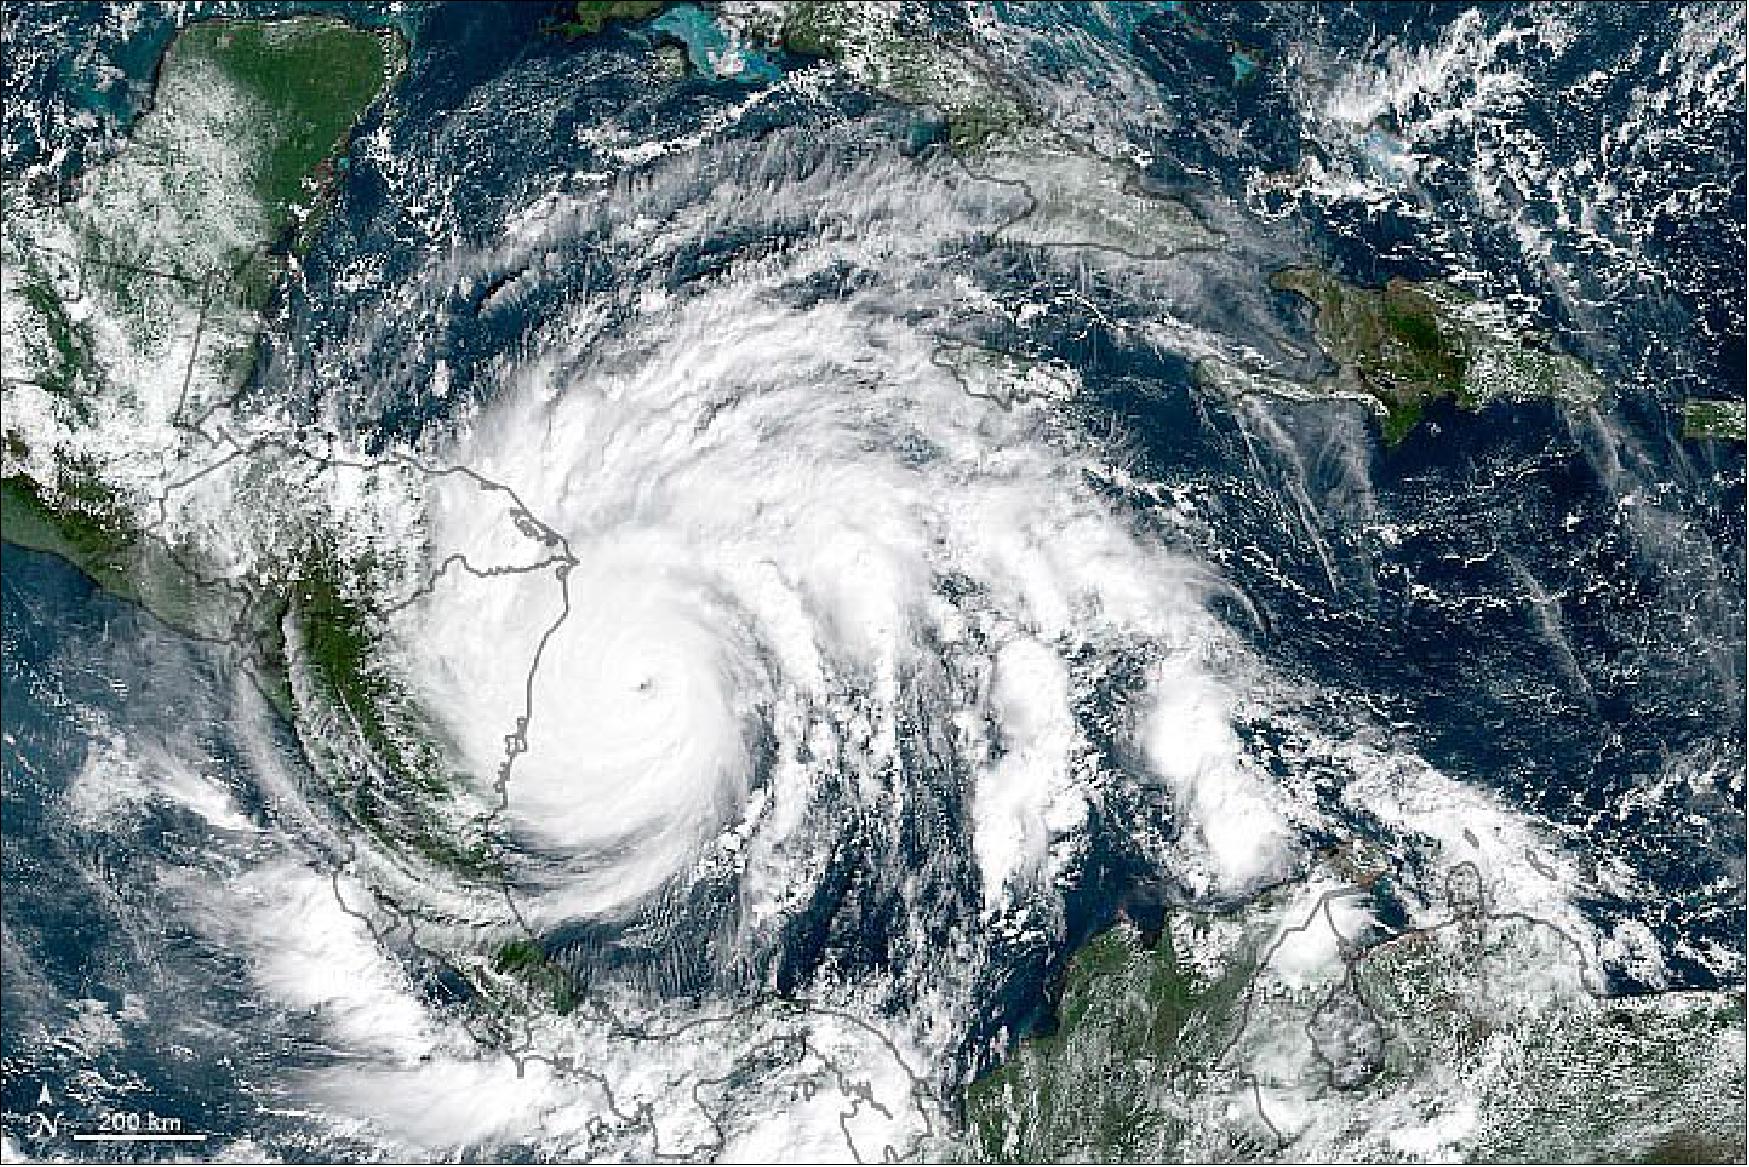 Figure 5: The natural-color image above was acquired at 10 a.m. local time (15:00 Universal Time) on November 16 by ABI (Advanced Baseline Imager) on GOES-16. The satellite is operated by the National Oceanic and Atmospheric Administration (NOAA), which includes the National Hurricane Center. NASA helps develop and launch the GOES series of satellites (image credit: NASA Earth Observatory images by Joshua Stevens, using GOES-16 imagery courtesy of NOAA and the National Environmental Satellite, Data, and Information Service (NESDIS), data from the Multiscale Ultrahigh Resolution (MUR) project, and Black Marble data from NASA/GSFC. Story by Michael Carlowicz, with scientific interpretation from Timothy Hall, NASA Goddard Institute for Space Studies)